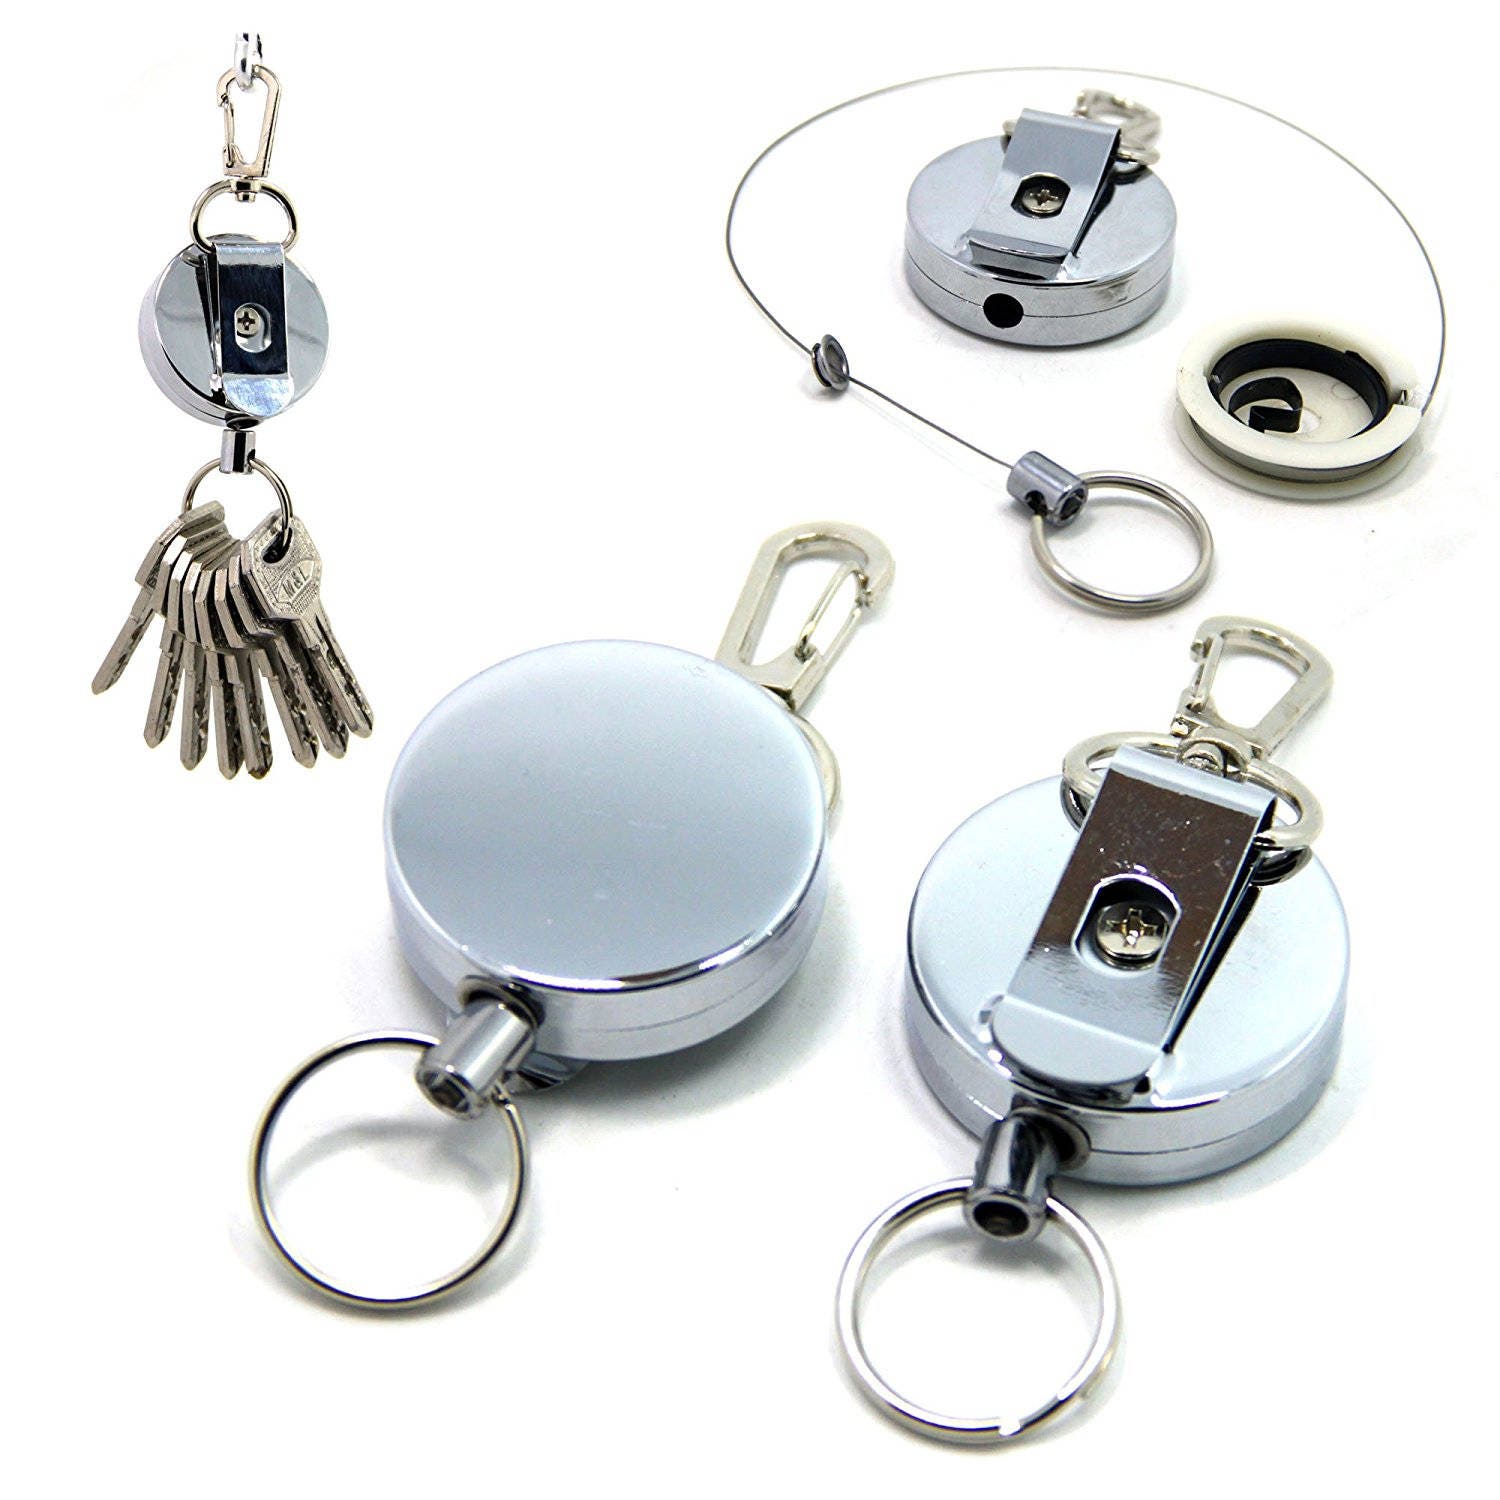 Set of 2 Heavy Duty Blank Metal ID Badge Reel With Retractable Cord & Belt  Clip for Keys, ID Badges, Belt Loop Clasp and Key Ring 